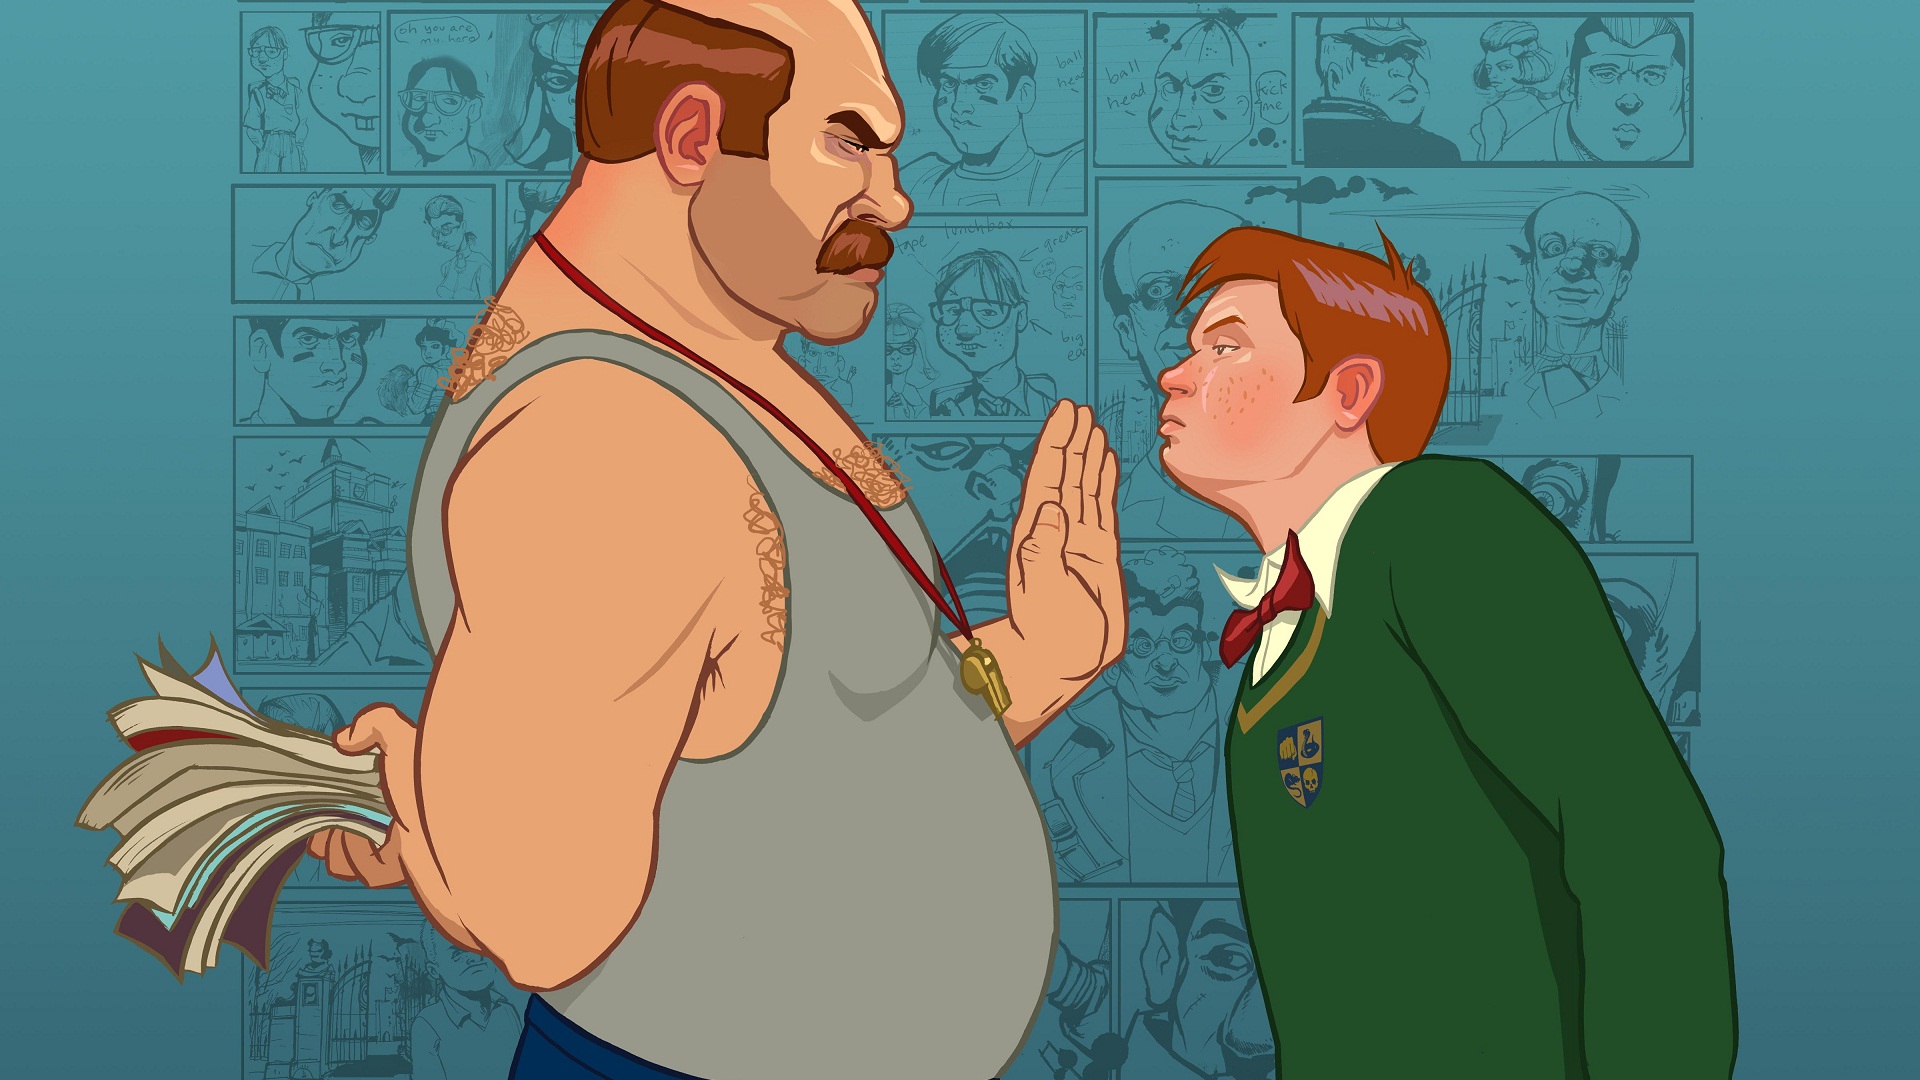 Polygon Might Have Just Leaked Bully 2 [Updated: Apparent Joke] -  RockstarINTEL